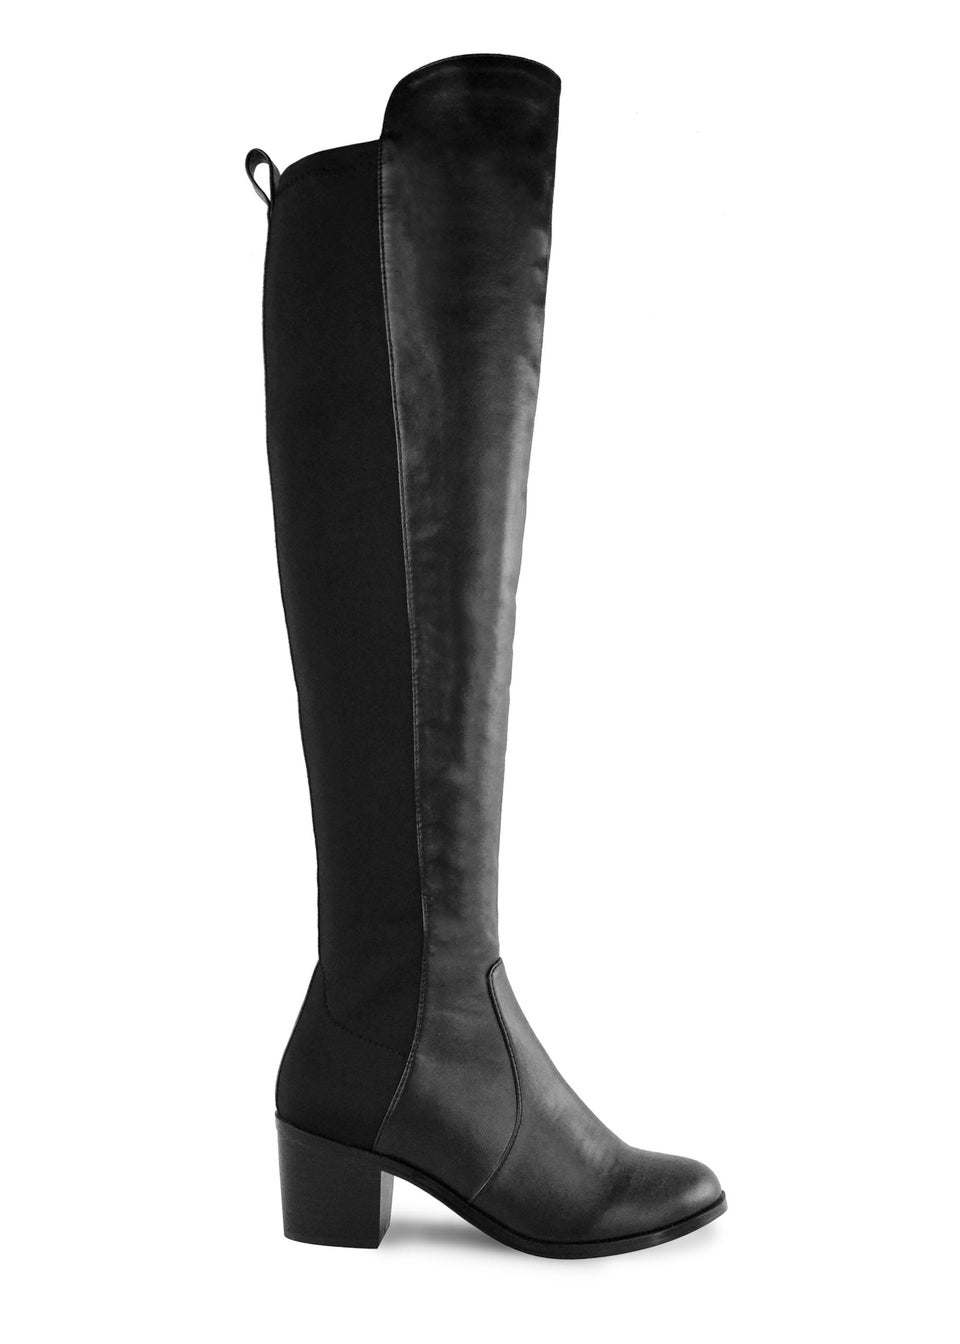 Where's That From Black Pu Britta Thigh High Heeled Boots